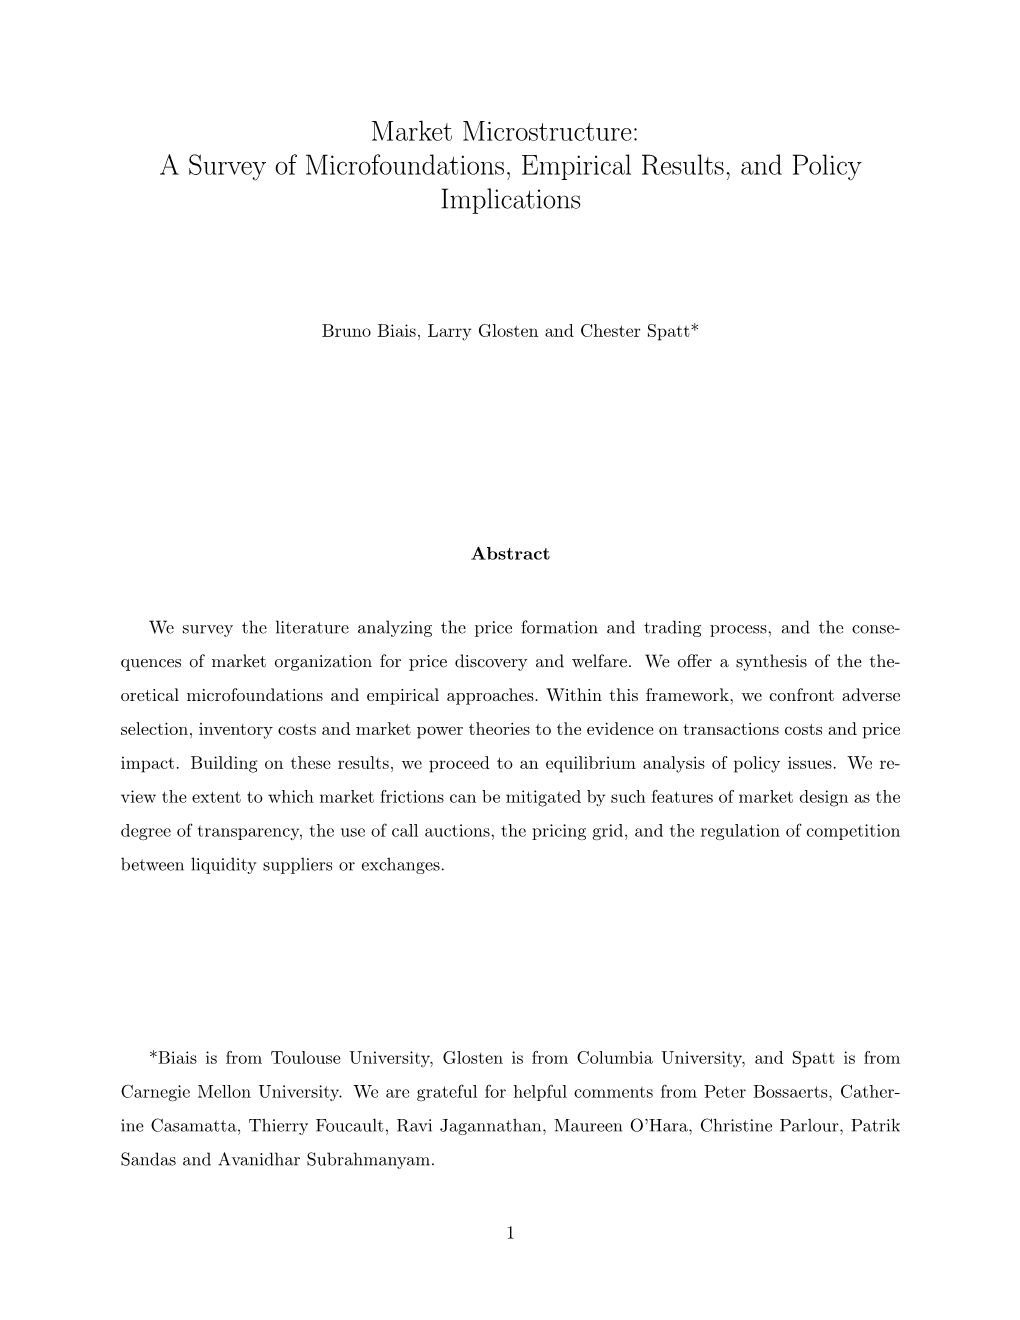 Market Microstructure: a Survey of Microfoundations, Empirical Results, and Policy Implications